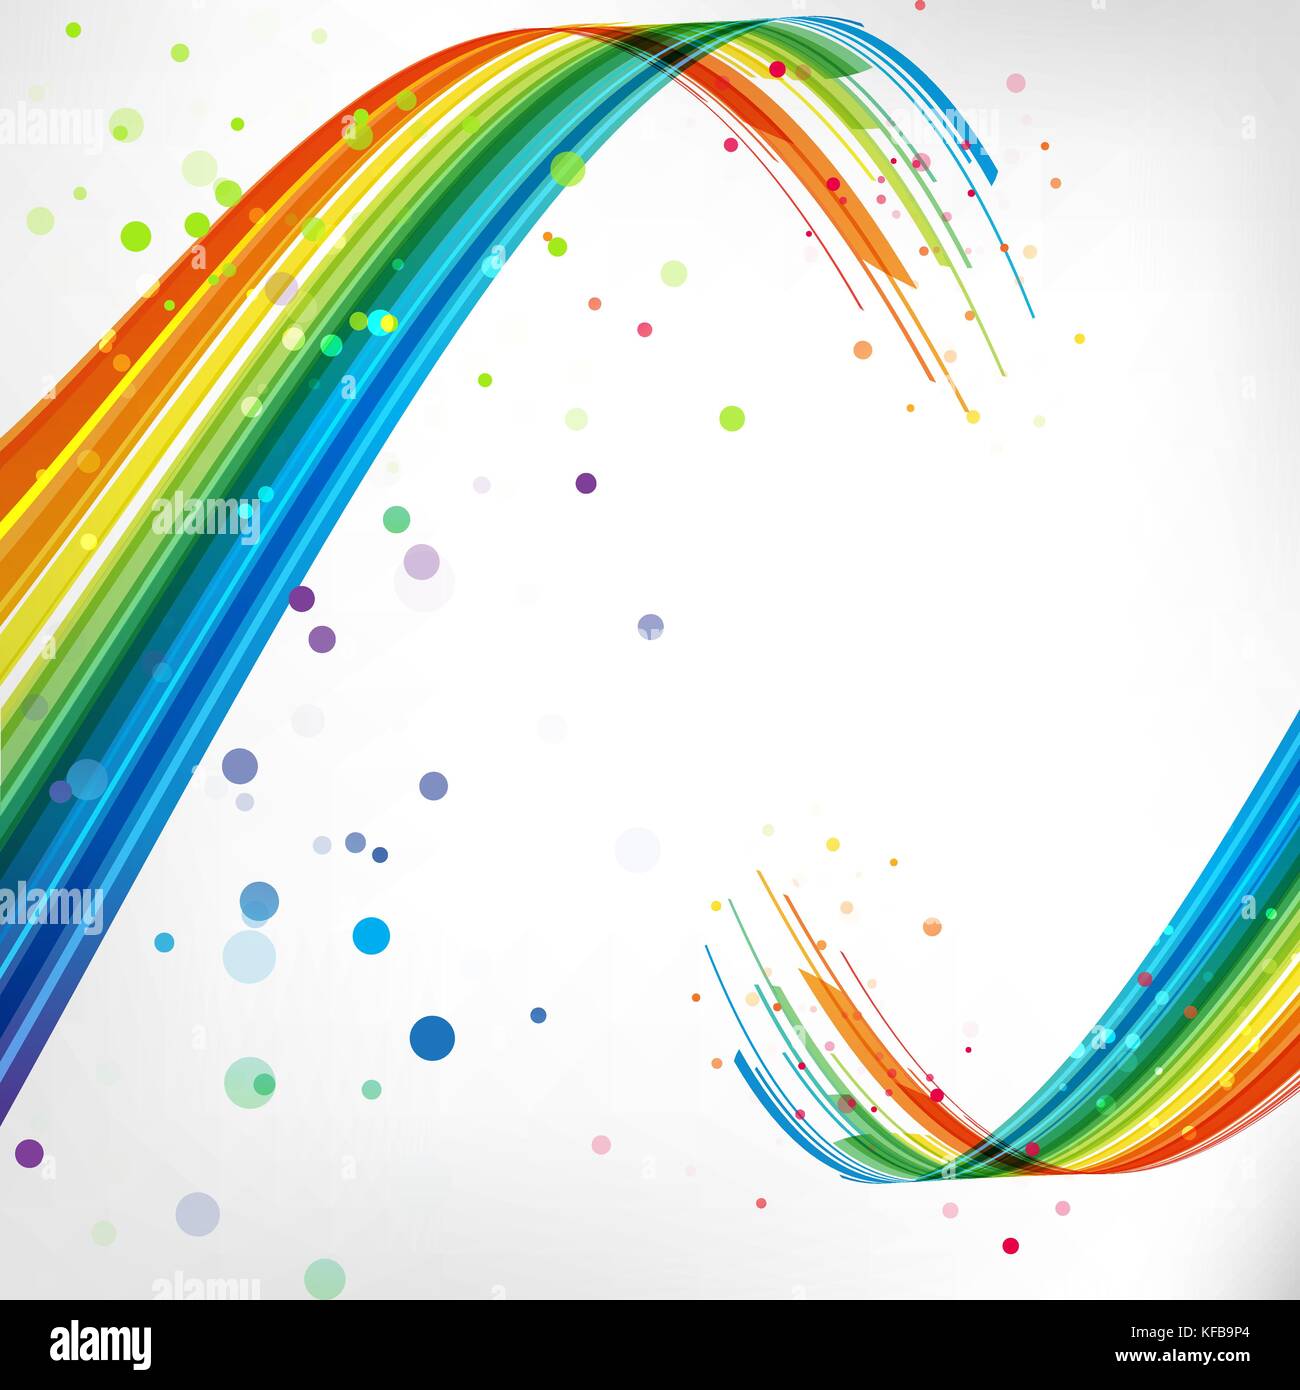 Abstract background with curve lines, colorful composition Stock Vector